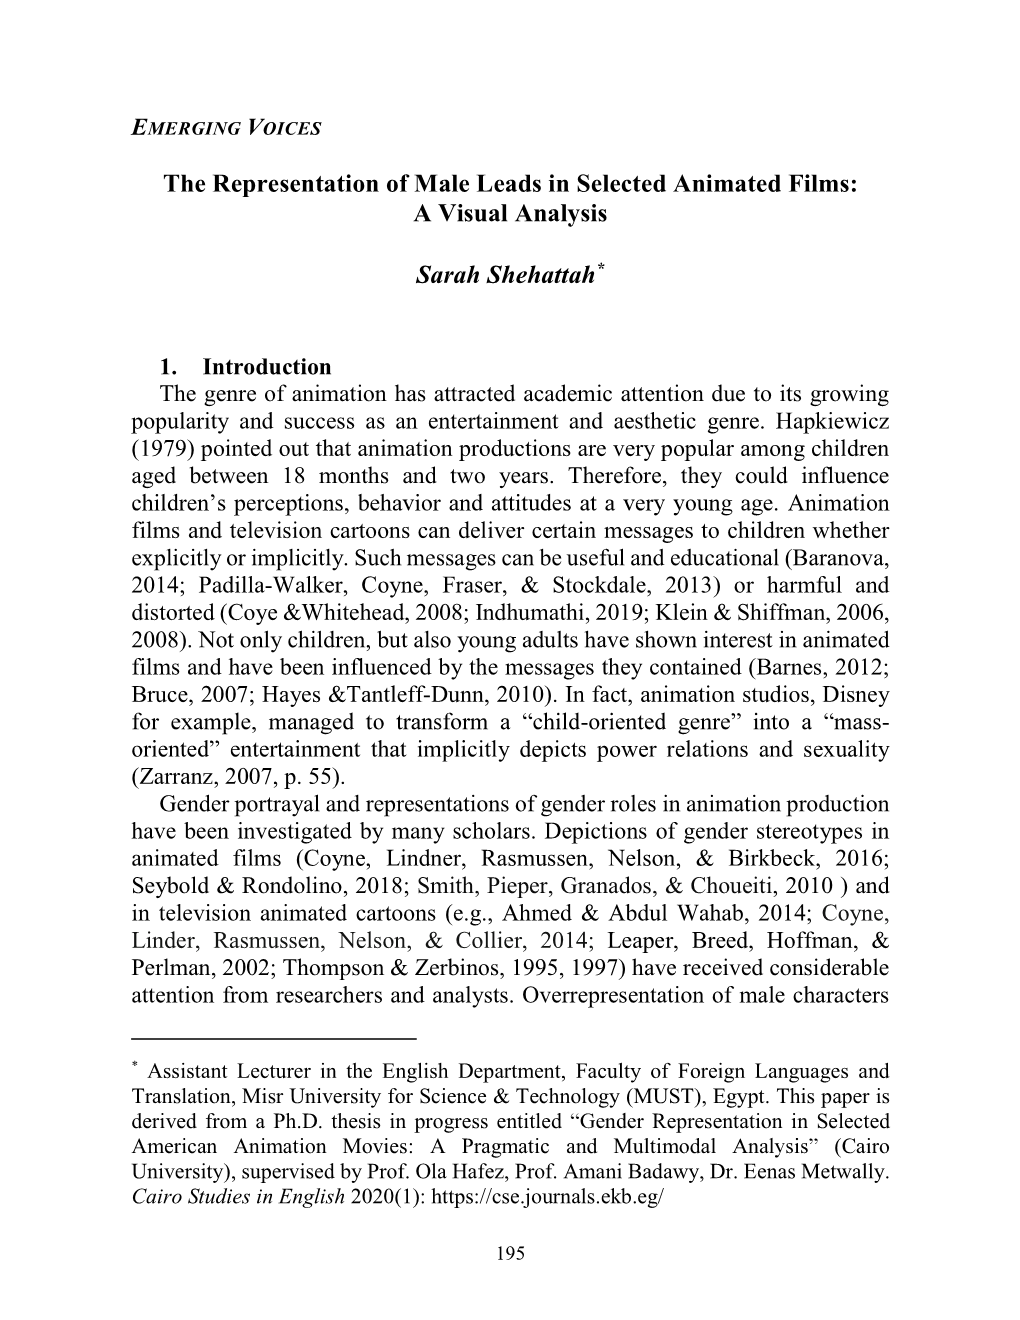 The Representation of Male Leads in Selected Animated Films: a Visual Analysis